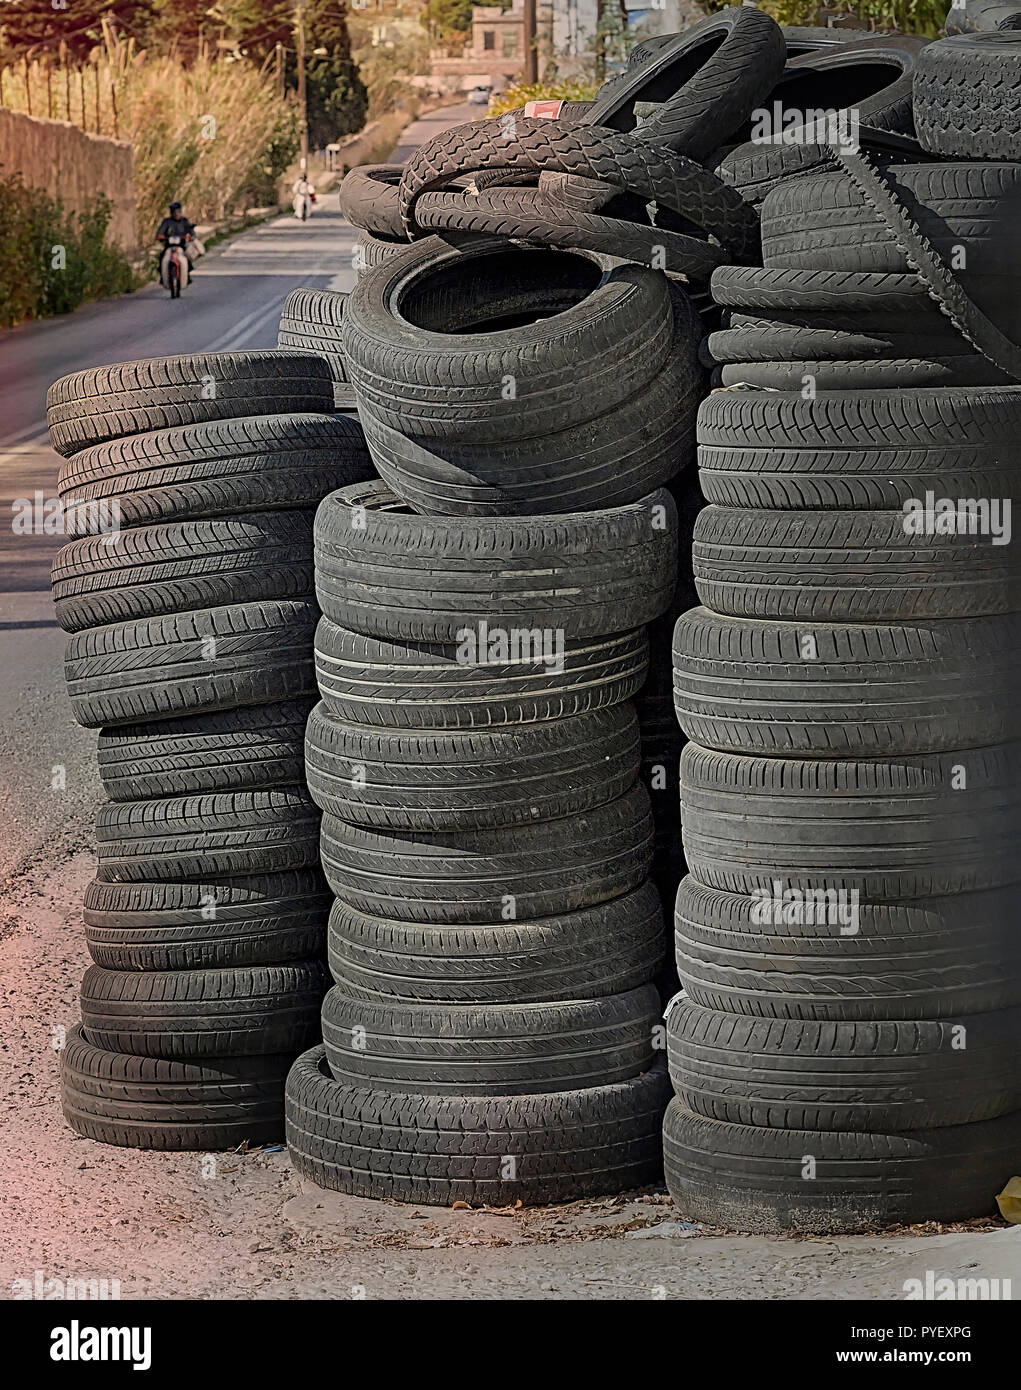 A pile of car tyres outside  a  service garage . Stock Image. Stock Photo